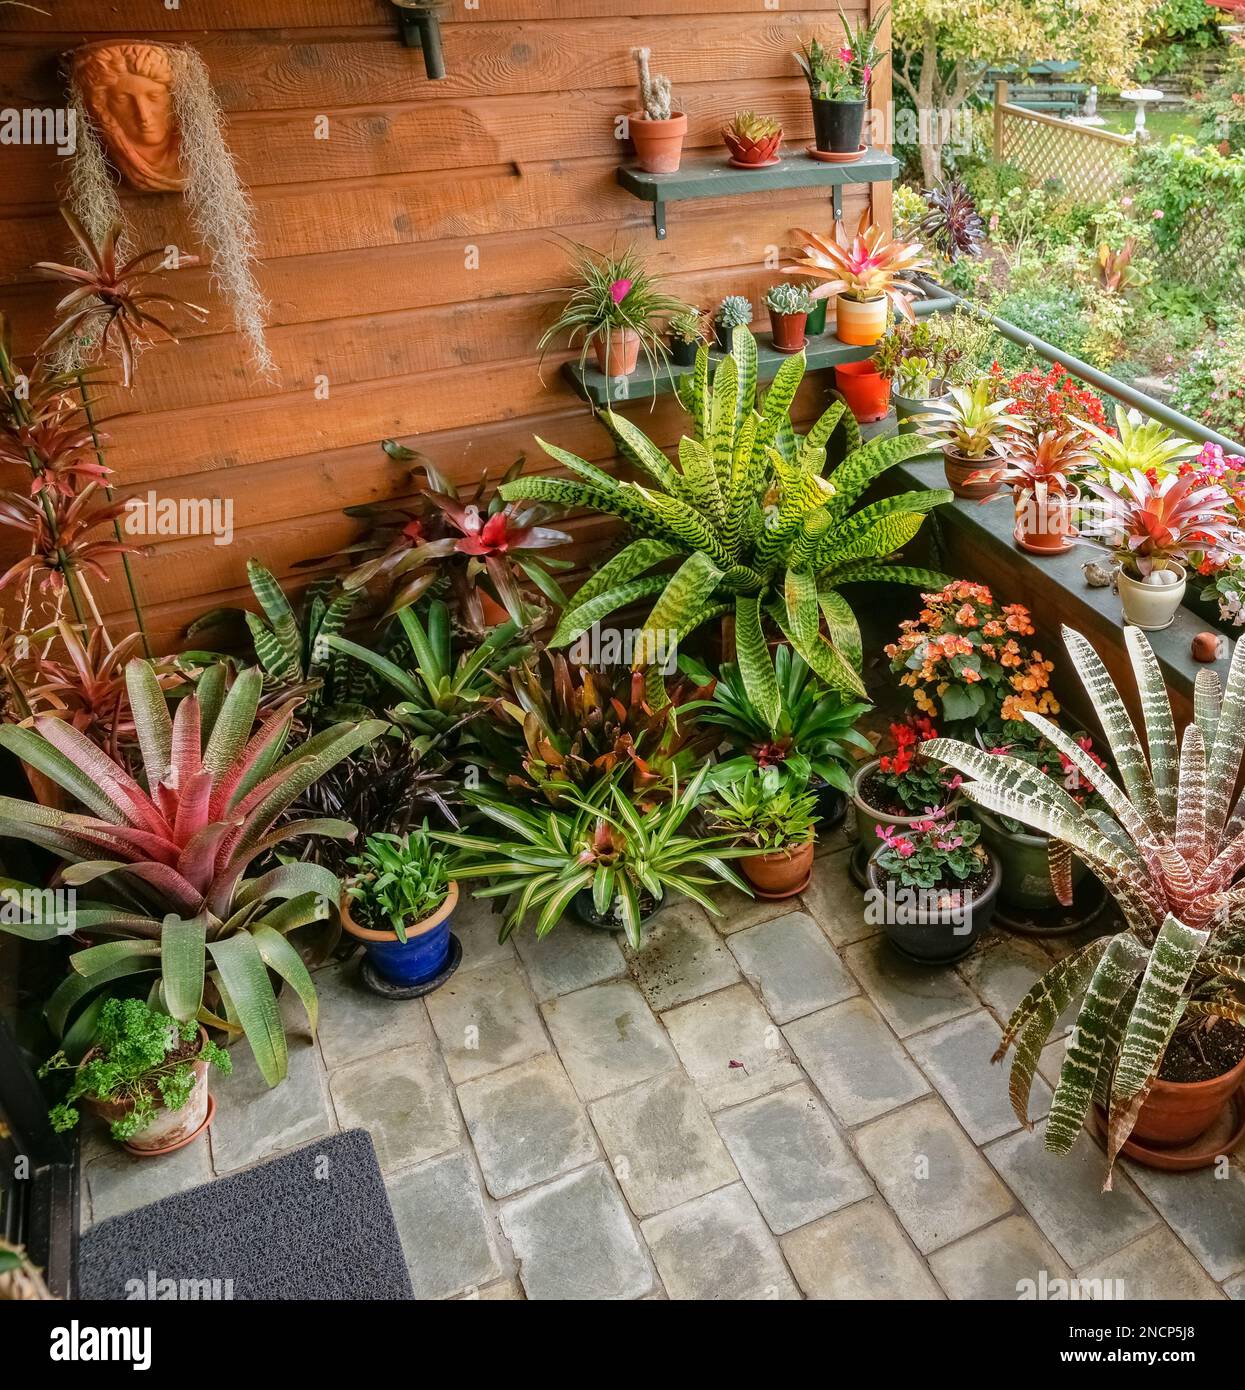 Patio potted plants in apartment garden of bromeliads. Stock Photo